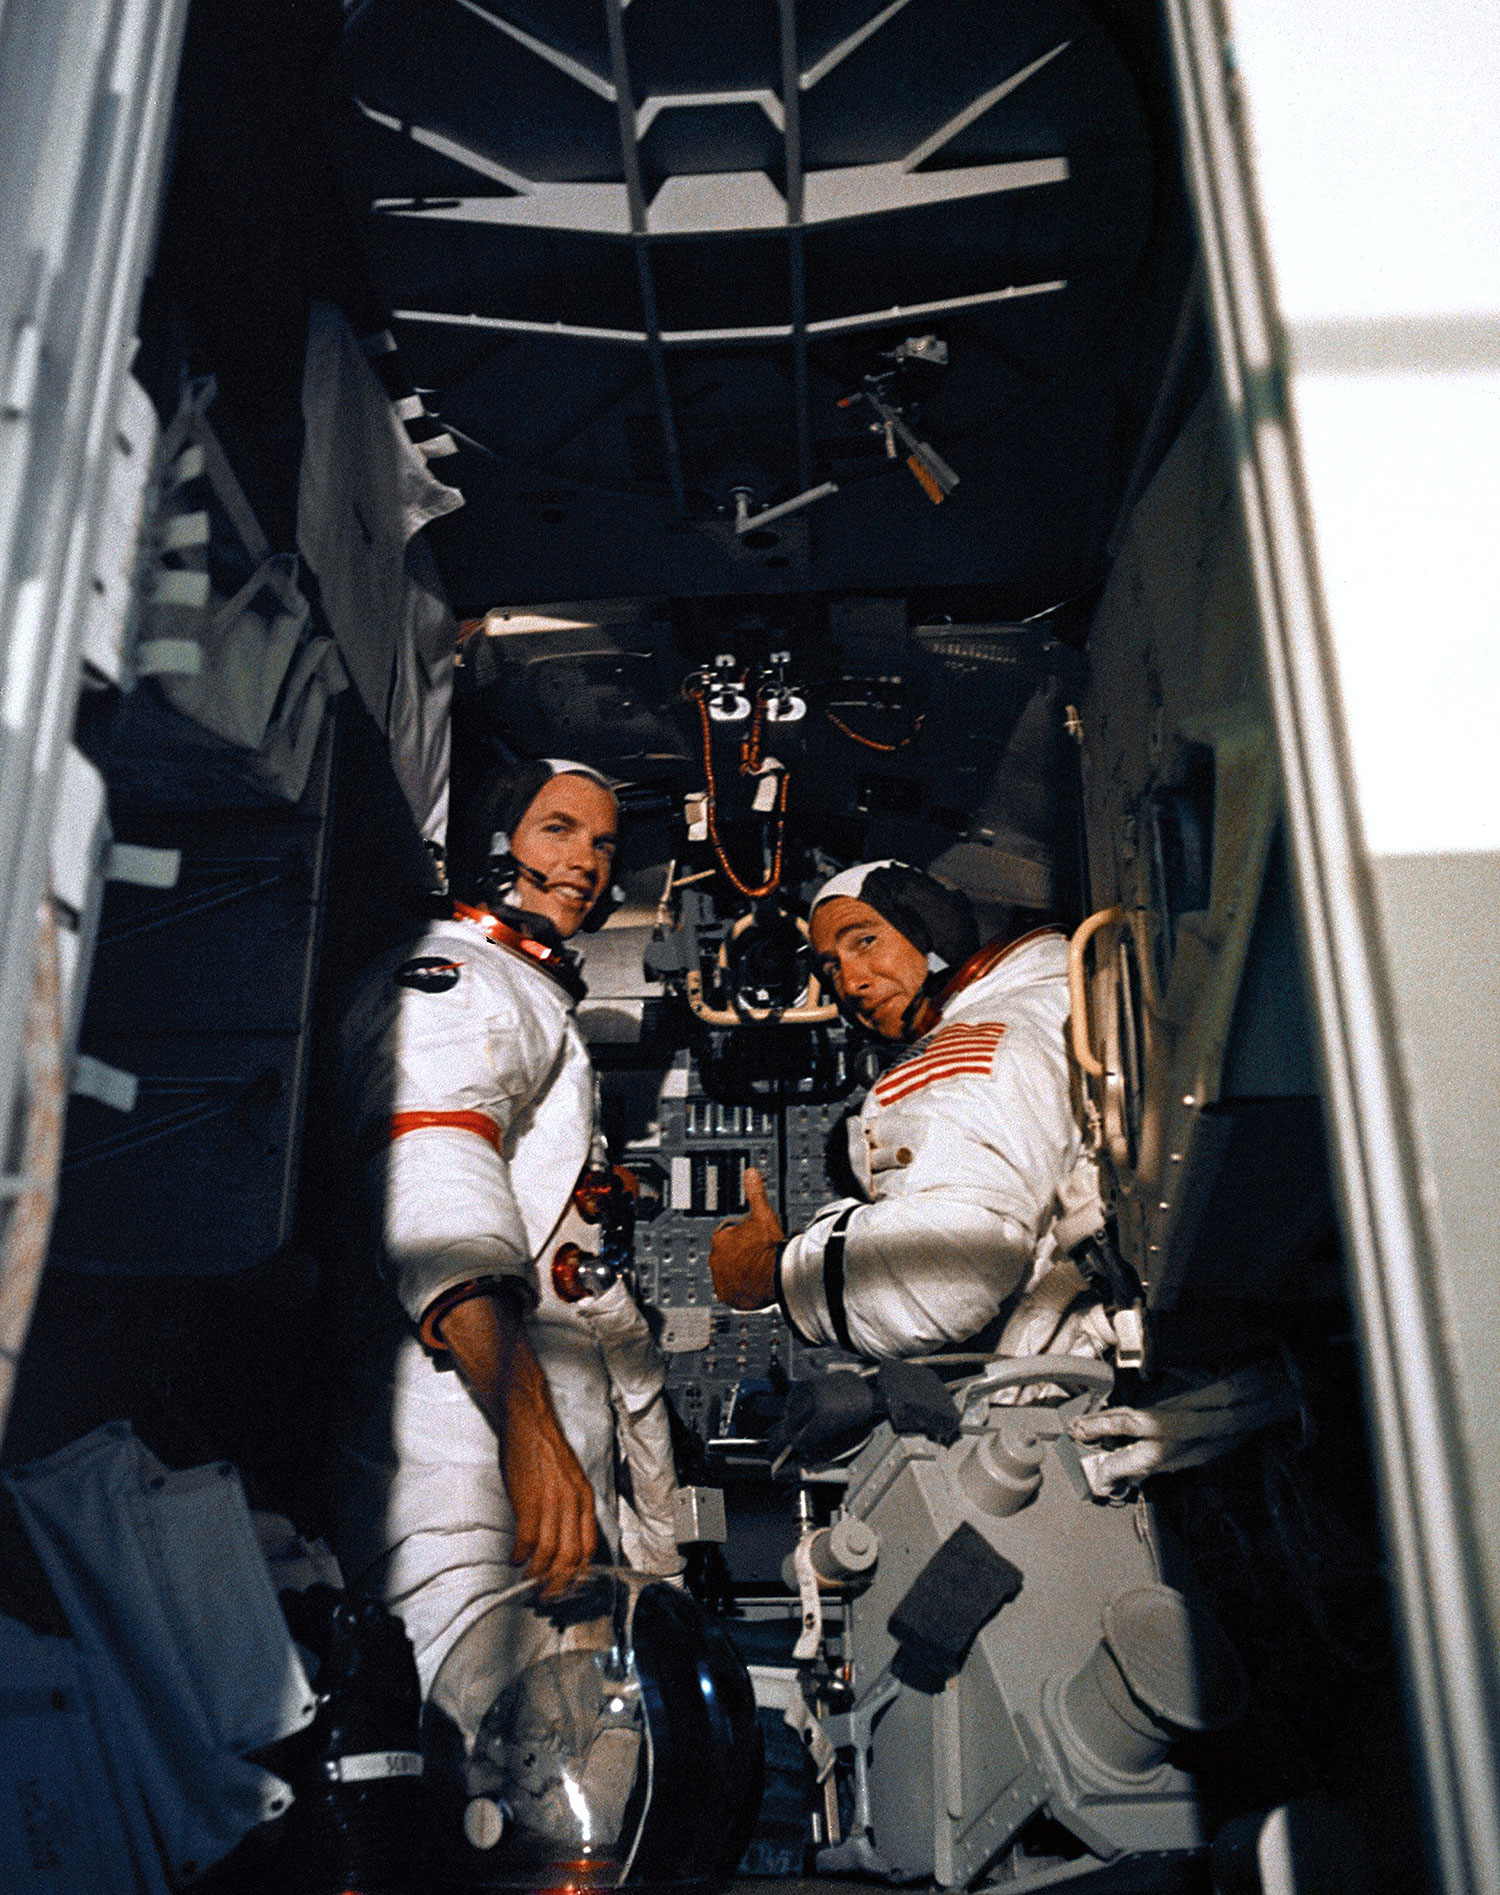 Dave Scott and Jim Irwin in the LM simulator. Credit: NASA via Retro Space Images